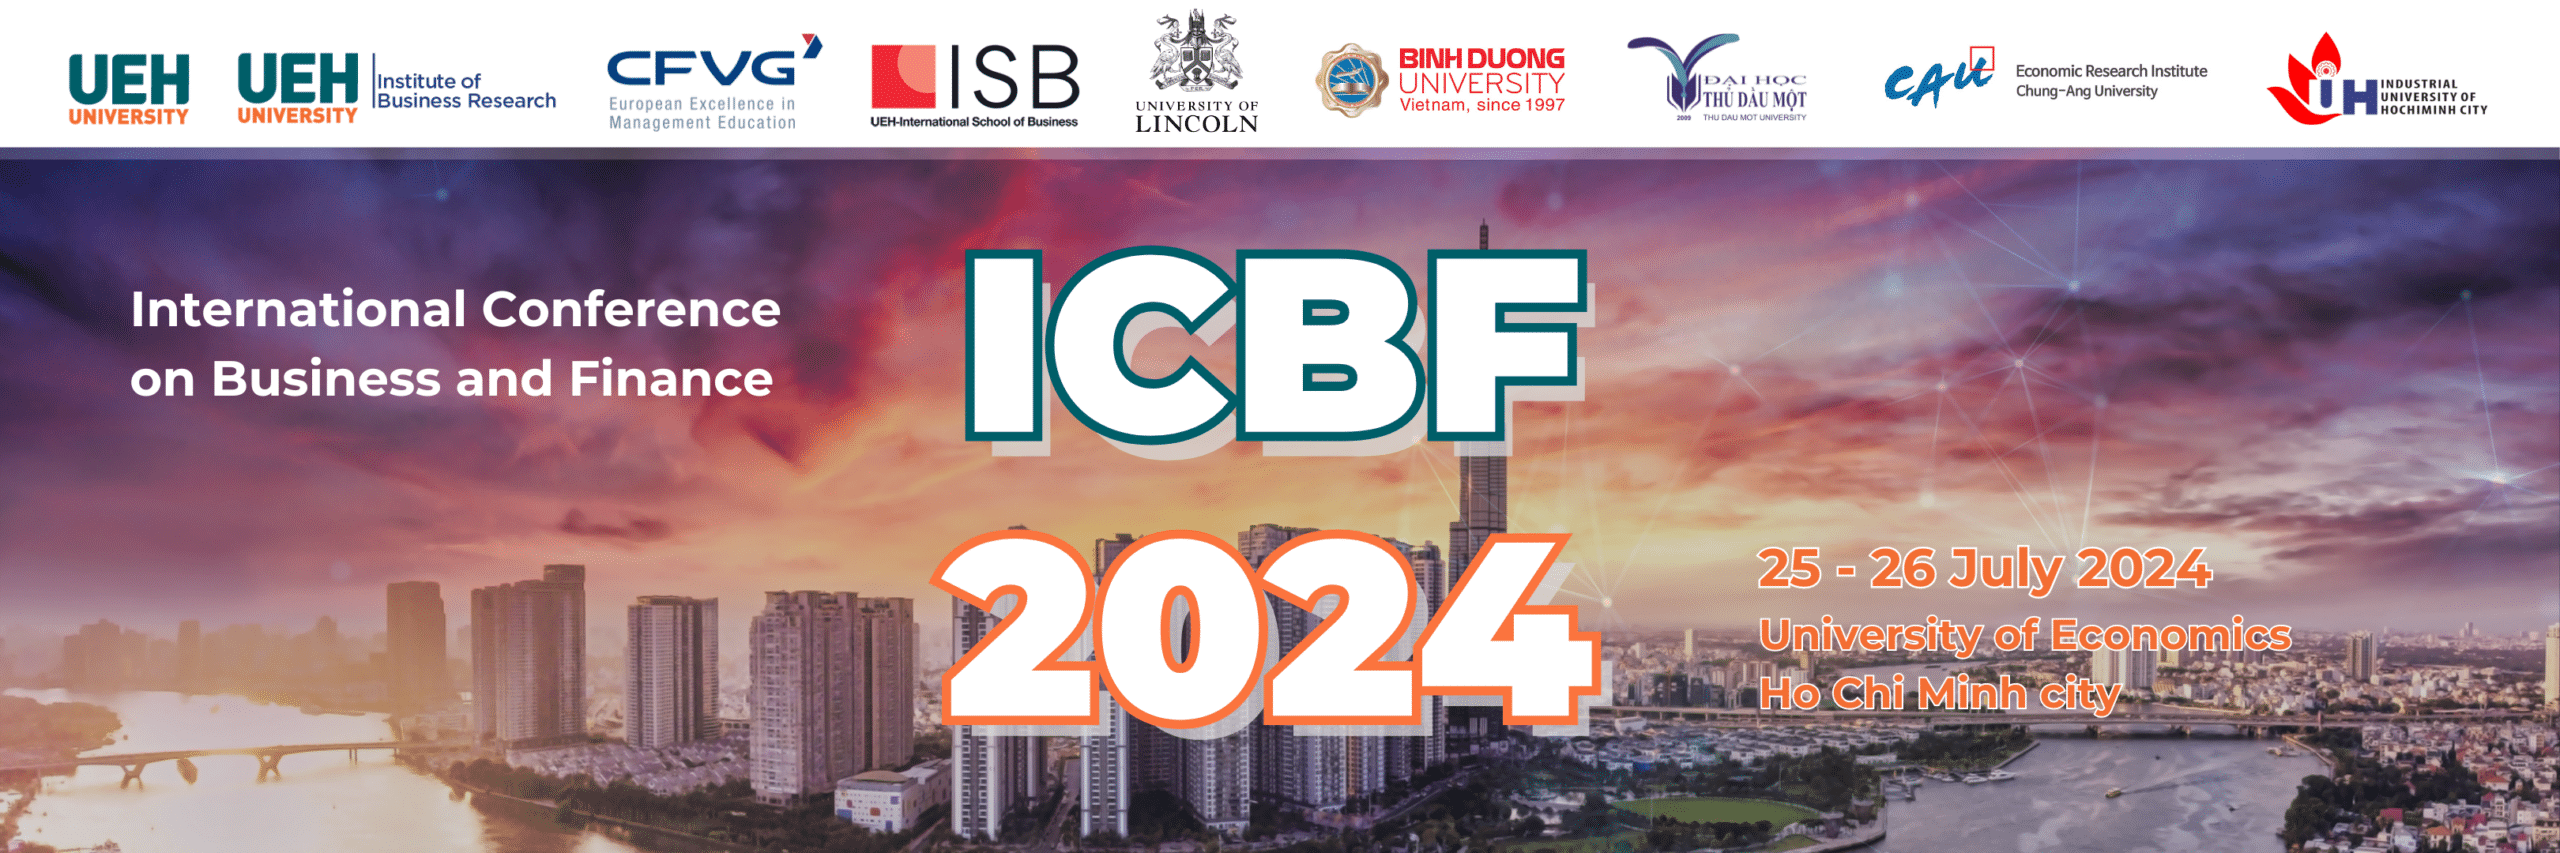 The International Conference on Business and Finance 2024